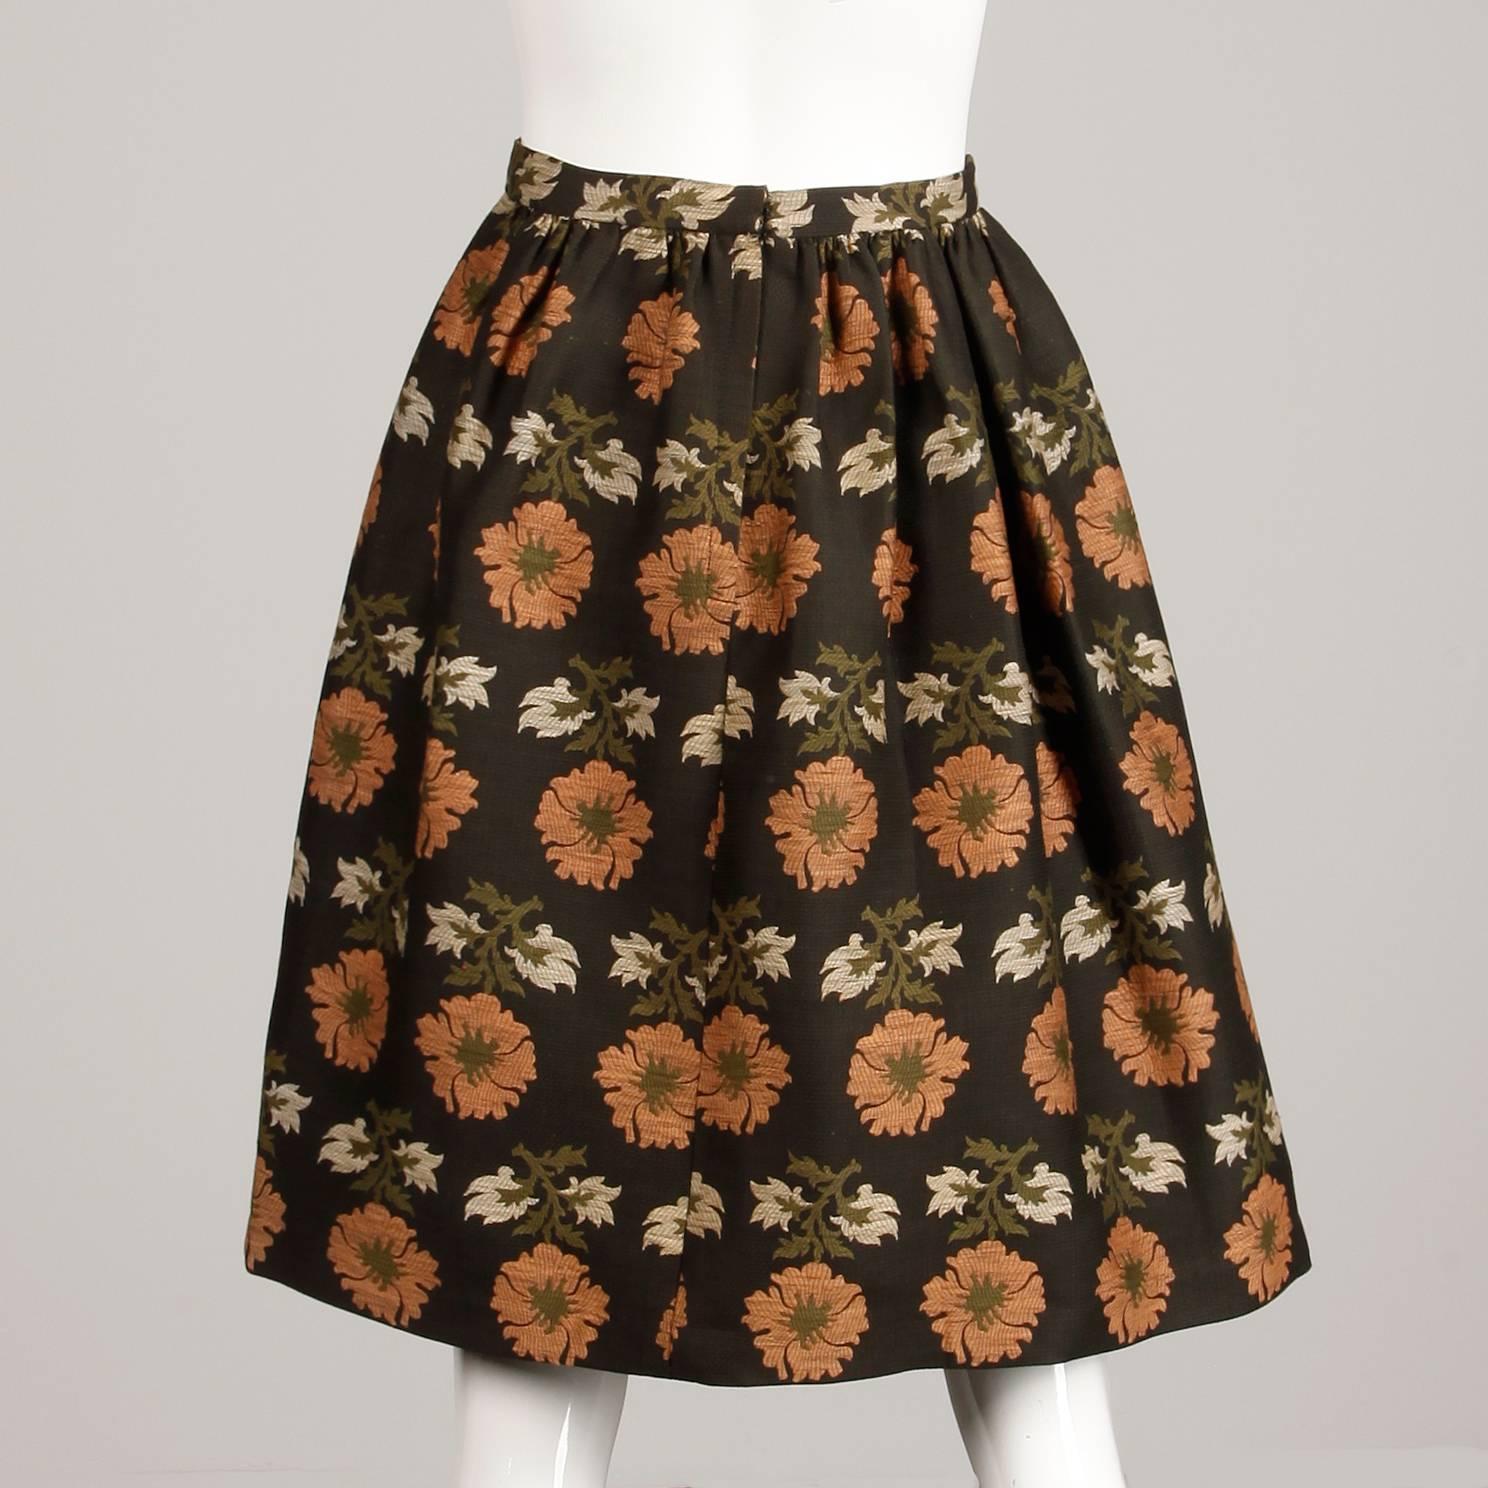 Women's 1960s Vintage Silk Jacquard Woven Floral Tapestry Skirt in Brown, Coral + Green